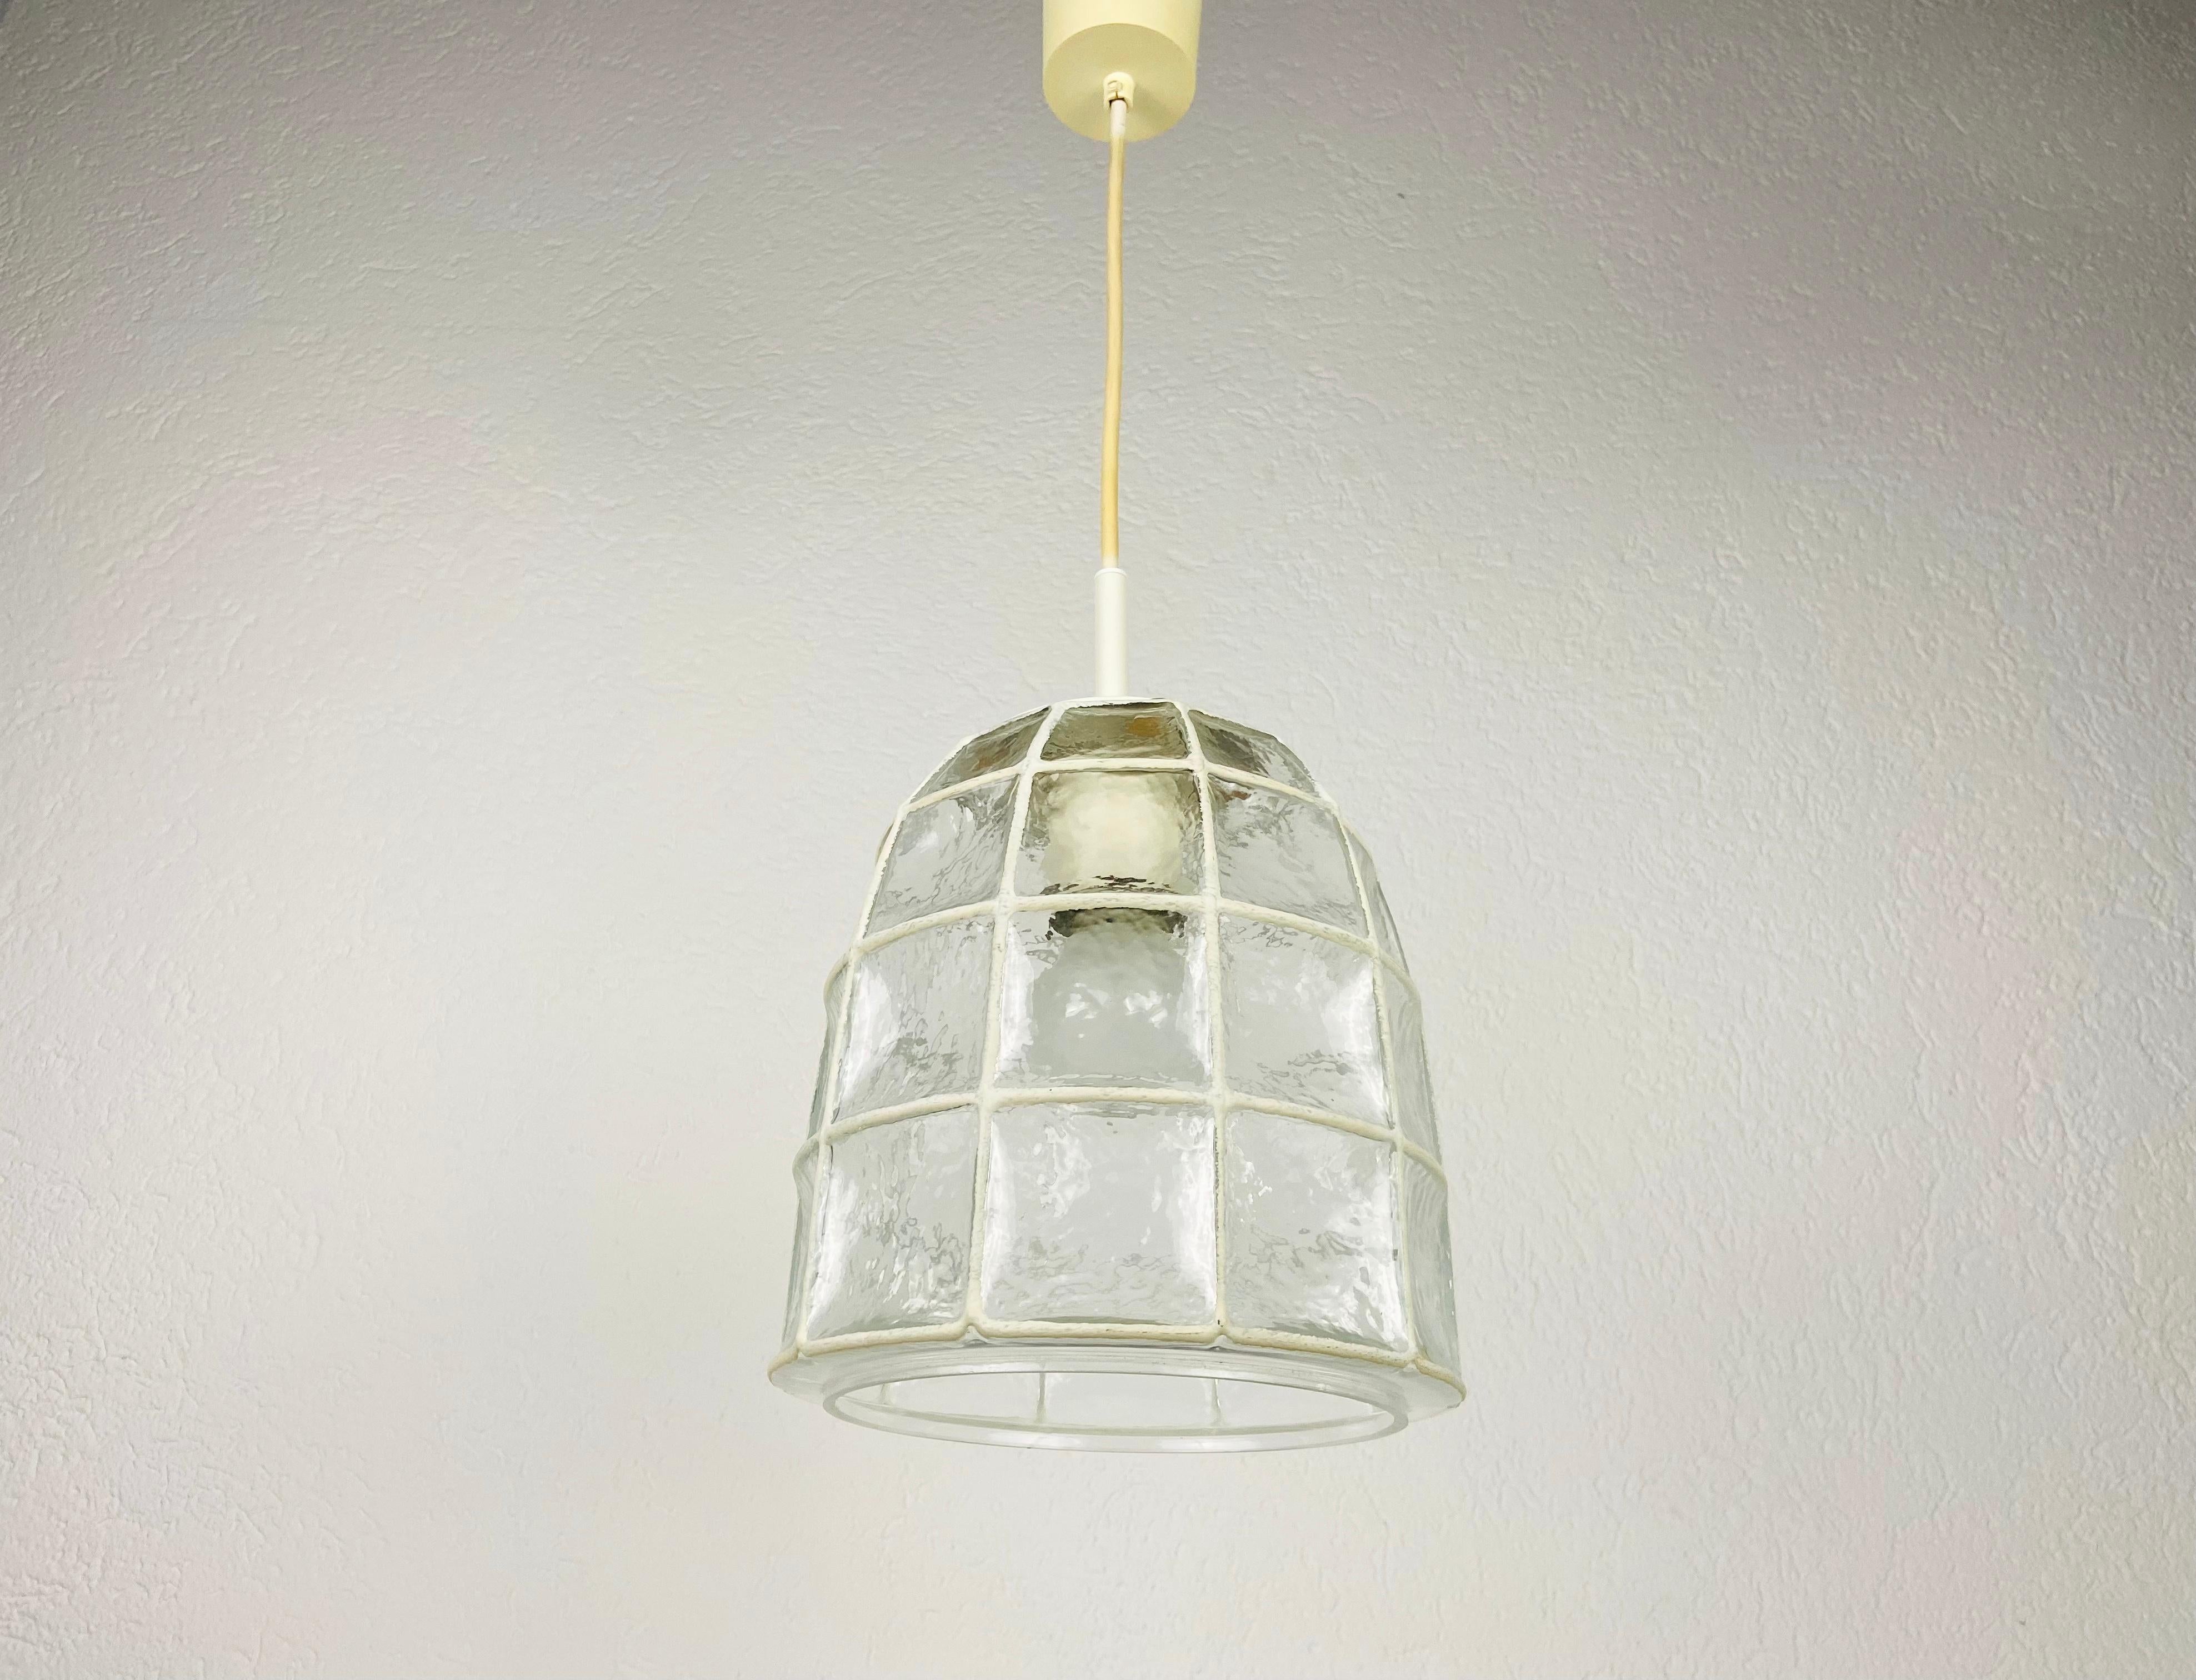 A Mid-Century Modern pendant lamp by Glashütte Limburg made in the 1960s in Germany. It is fascinating with its beautiful shape and bubble glass. The fixture has a very nice Minimalist design.

The light requires one E27 (US E26) light bulb. Works